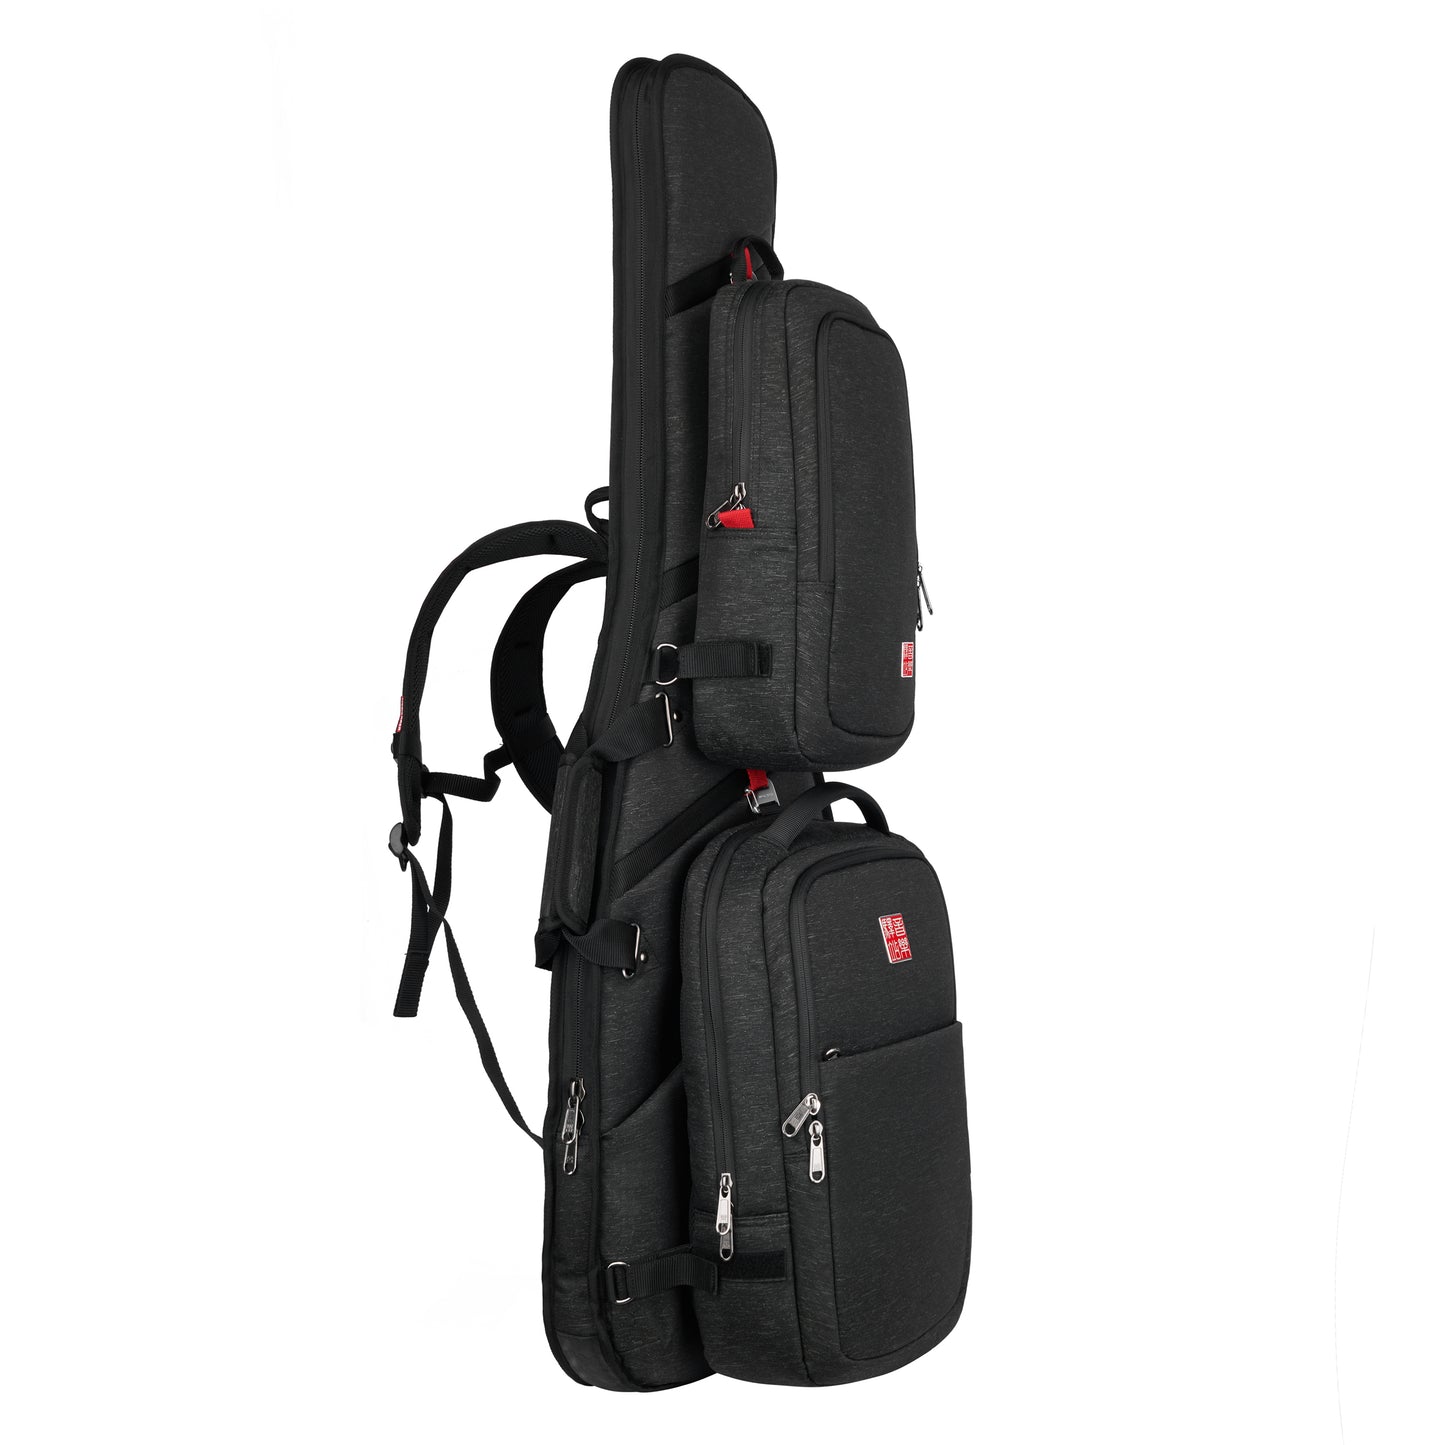 Music Area Electric Guitar Case with Two Detachable Backpacks - RBOEGBLK